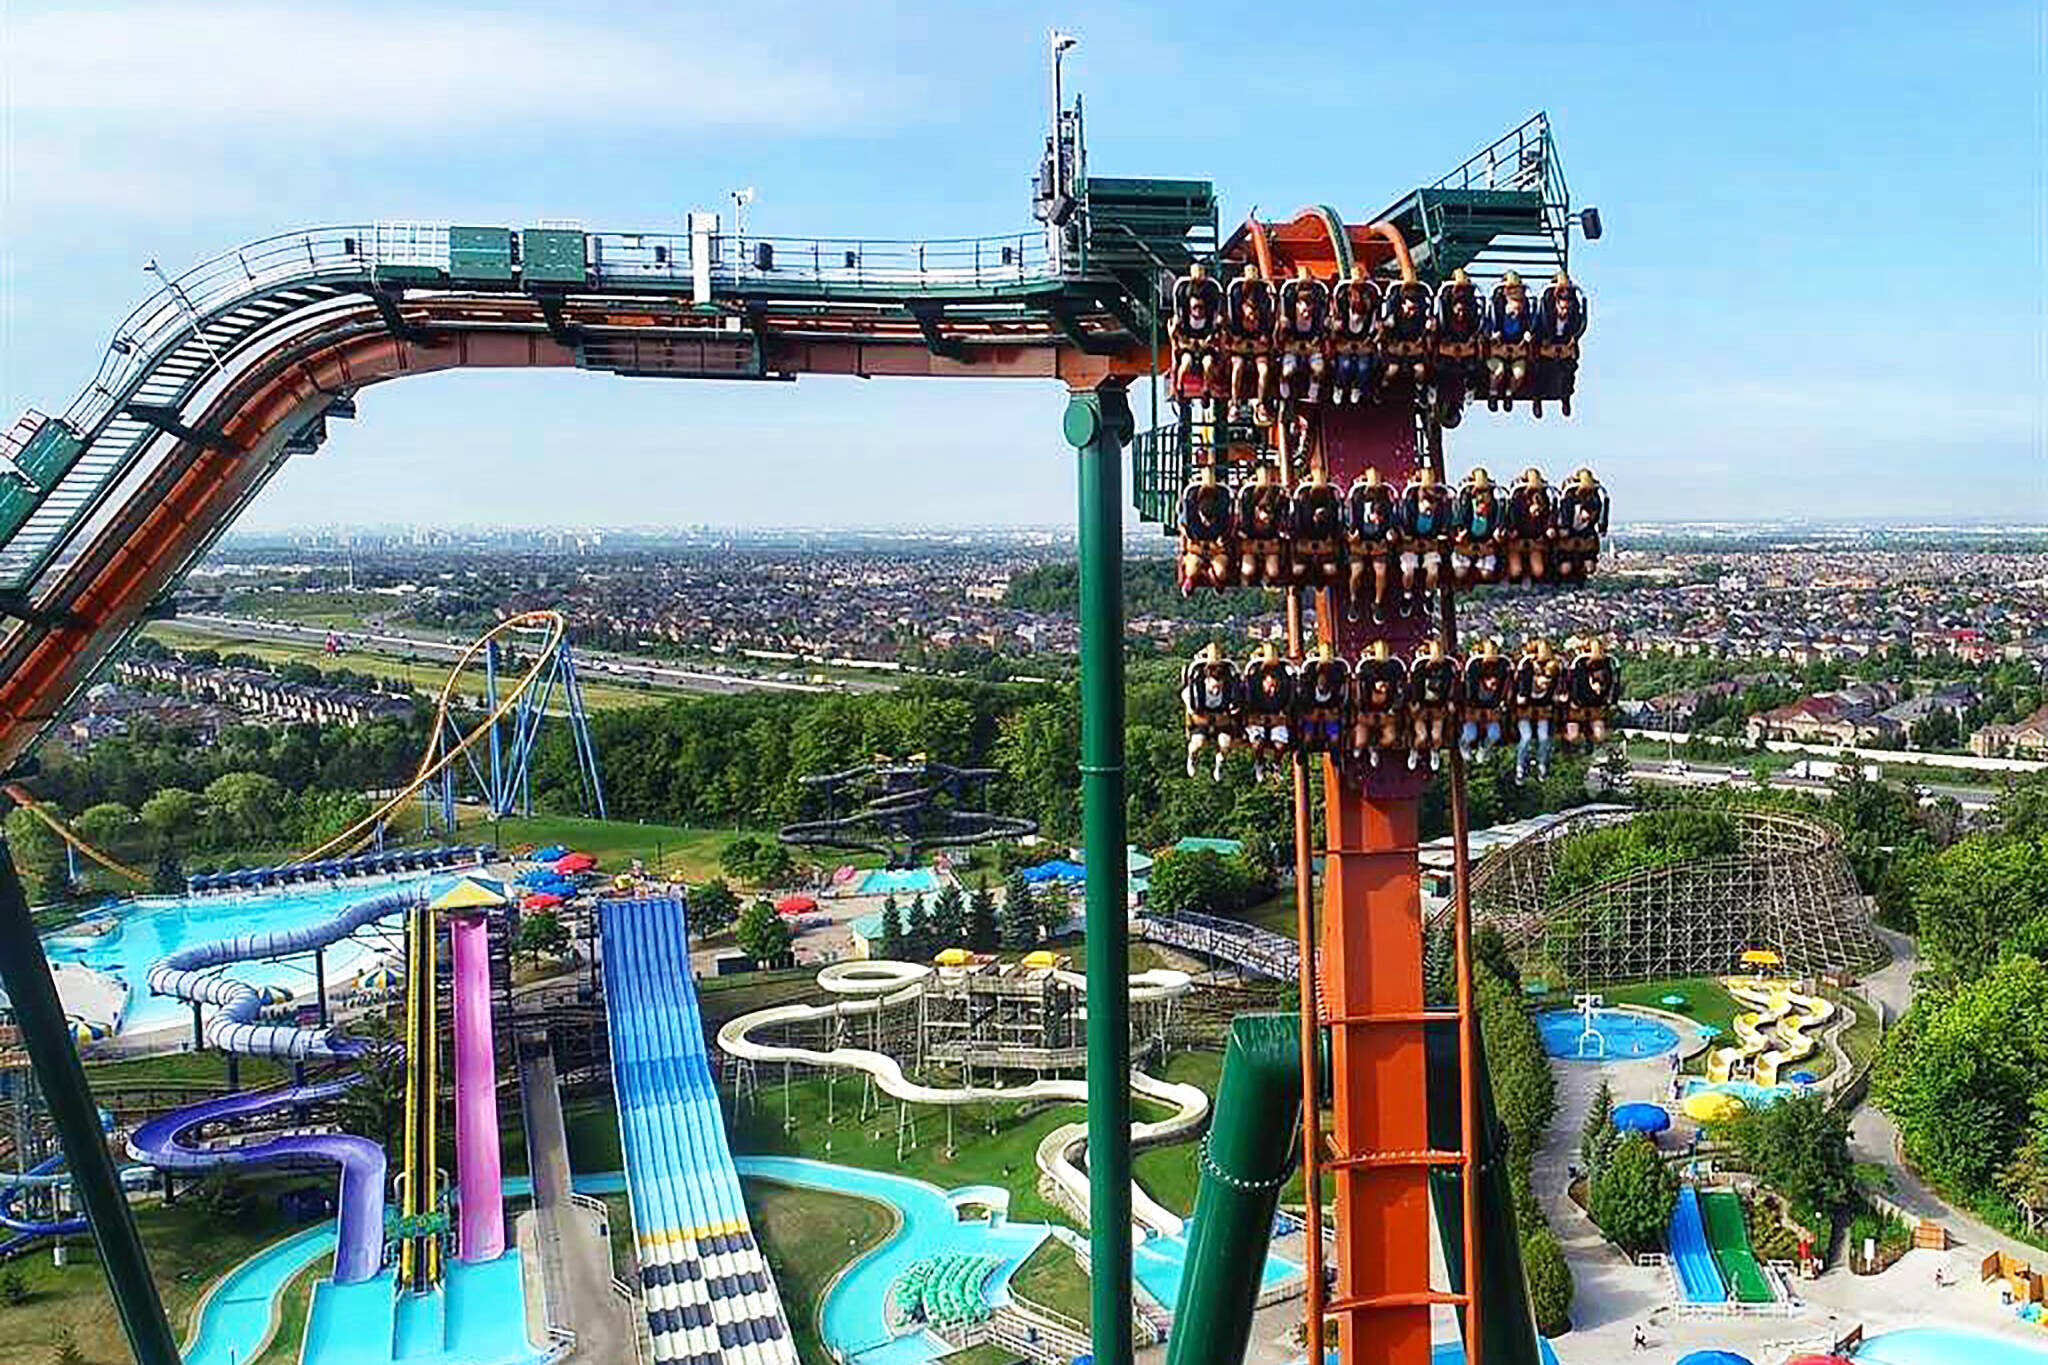 Canada's Wonderland is doing virtual roller coaster rides you can take from home